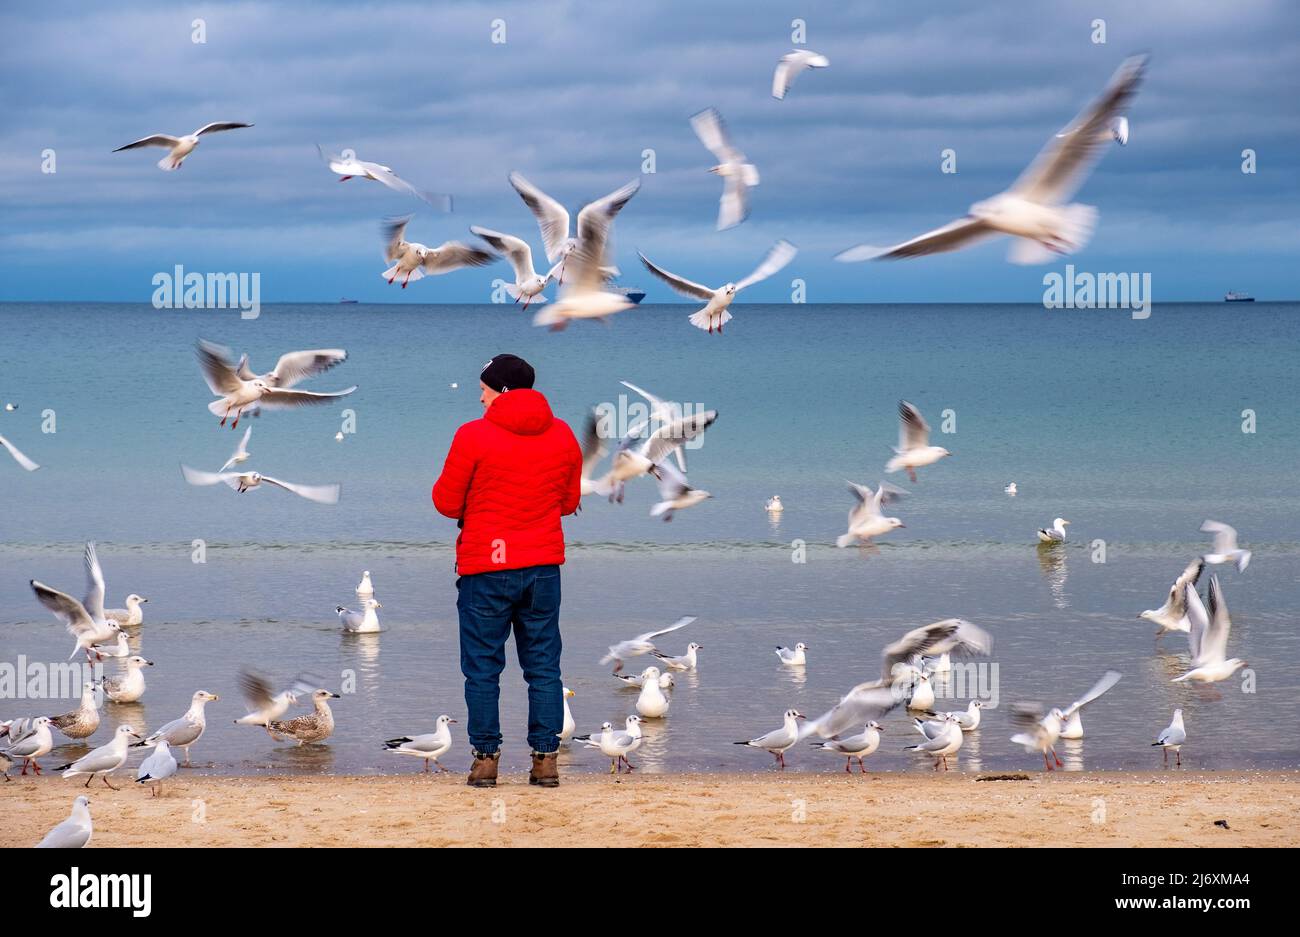 Gdynia, Poland - February 5, 2022: Single person feeding herd of laughing gulls and other sea birds in winter season at Baltic sea beach offshore Orlo Stock Photo